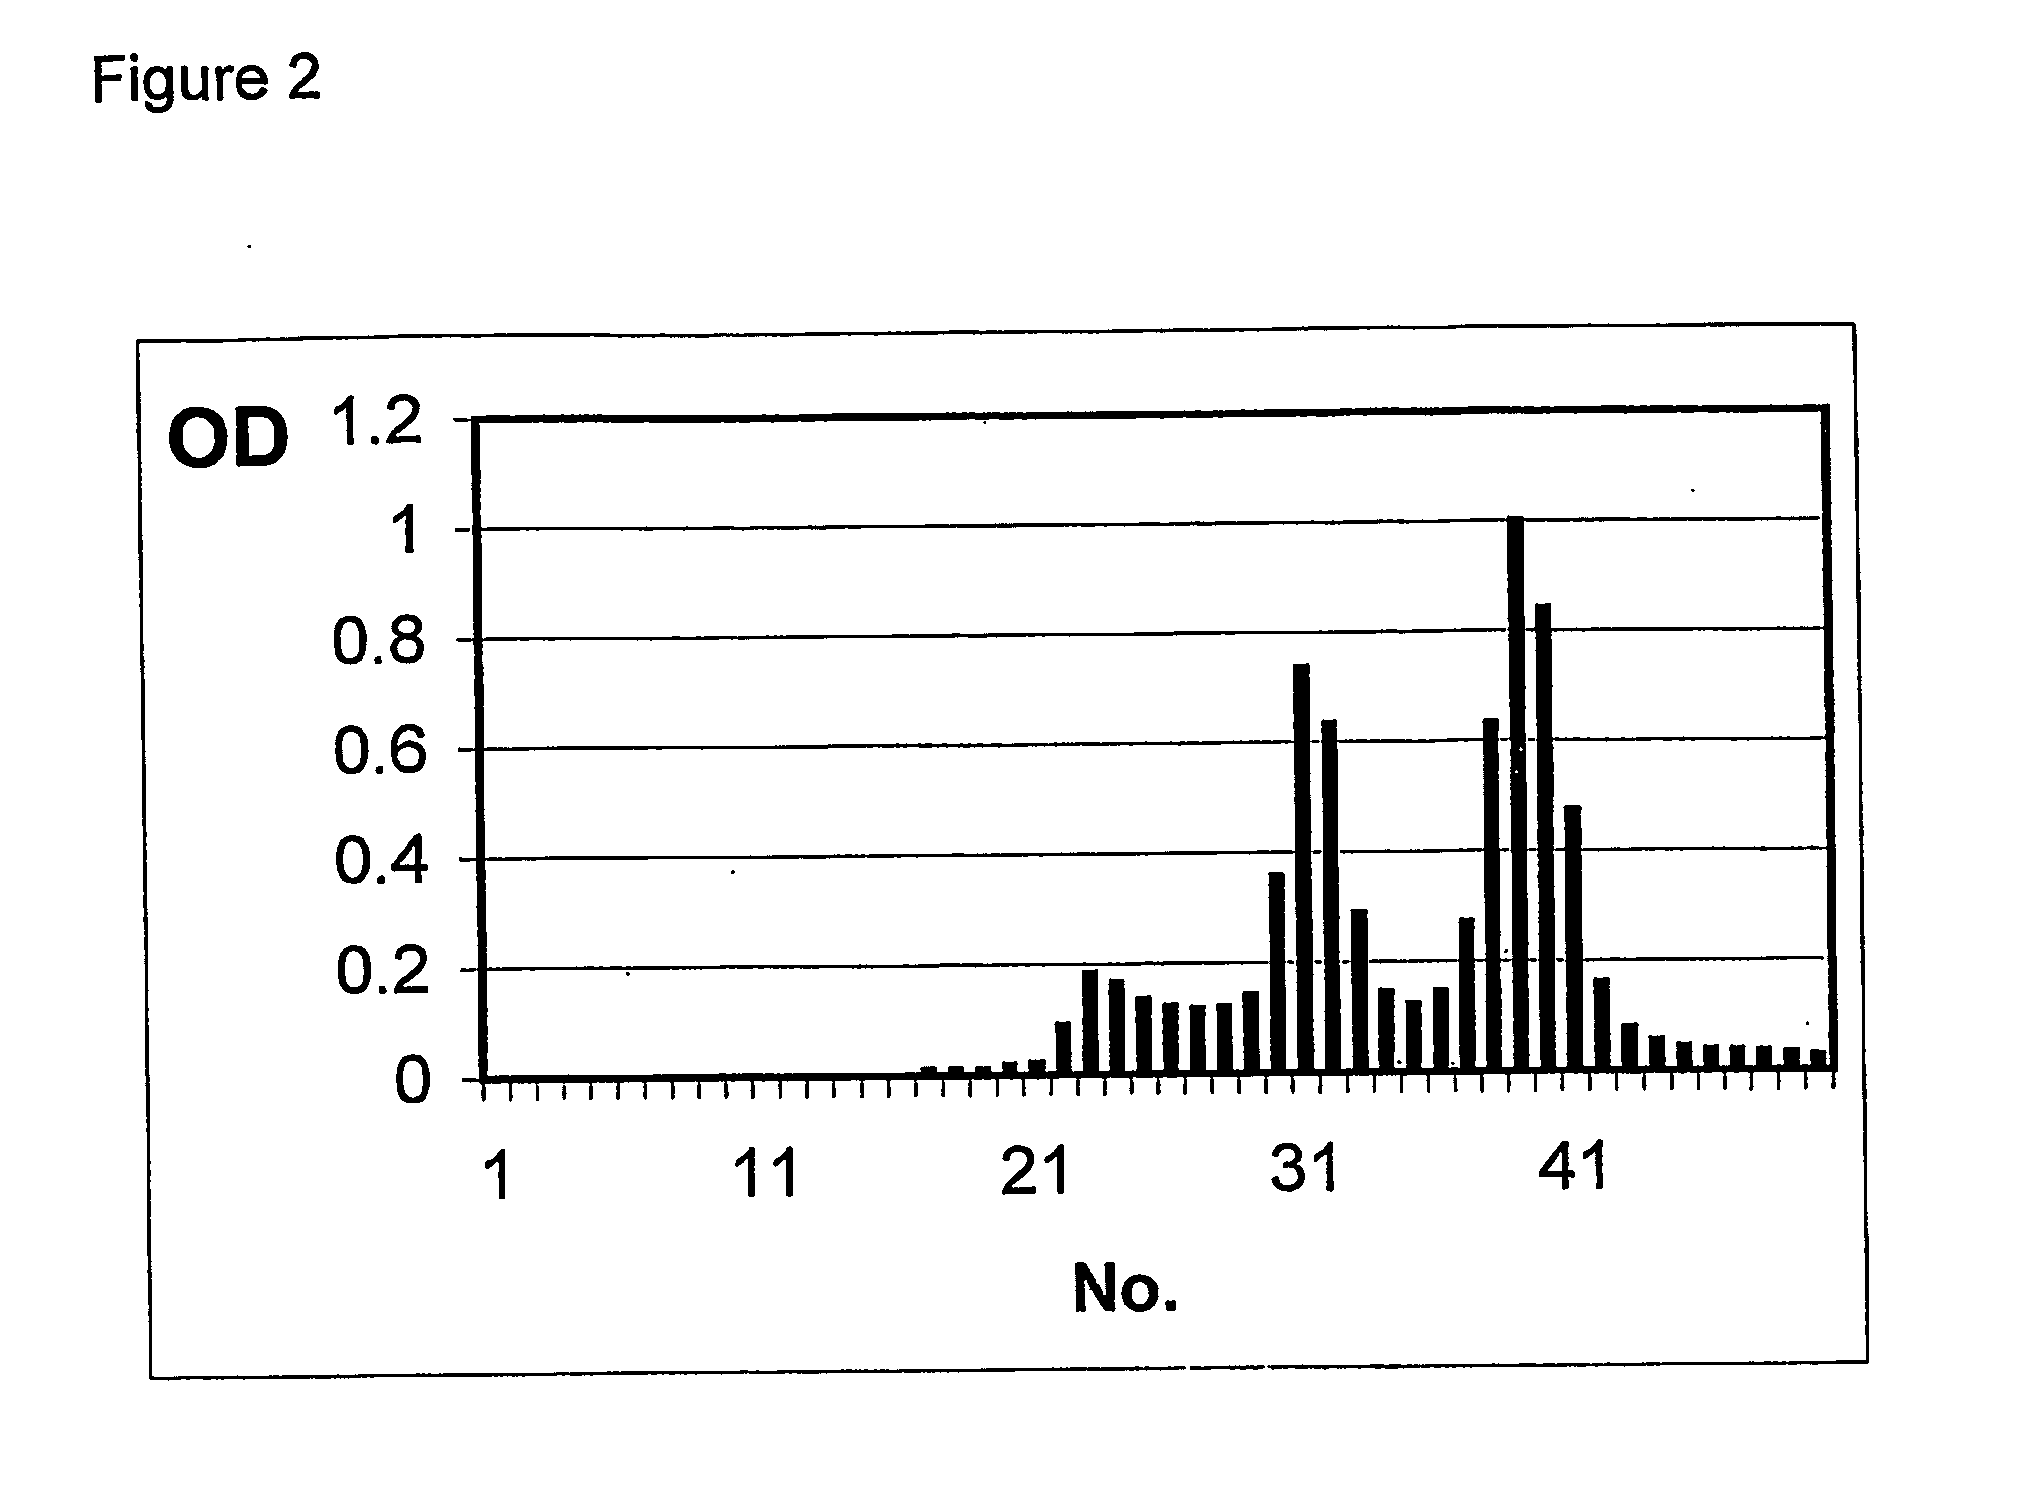 Follicular fluid for prolonged growth and survival of cells for cell therapies